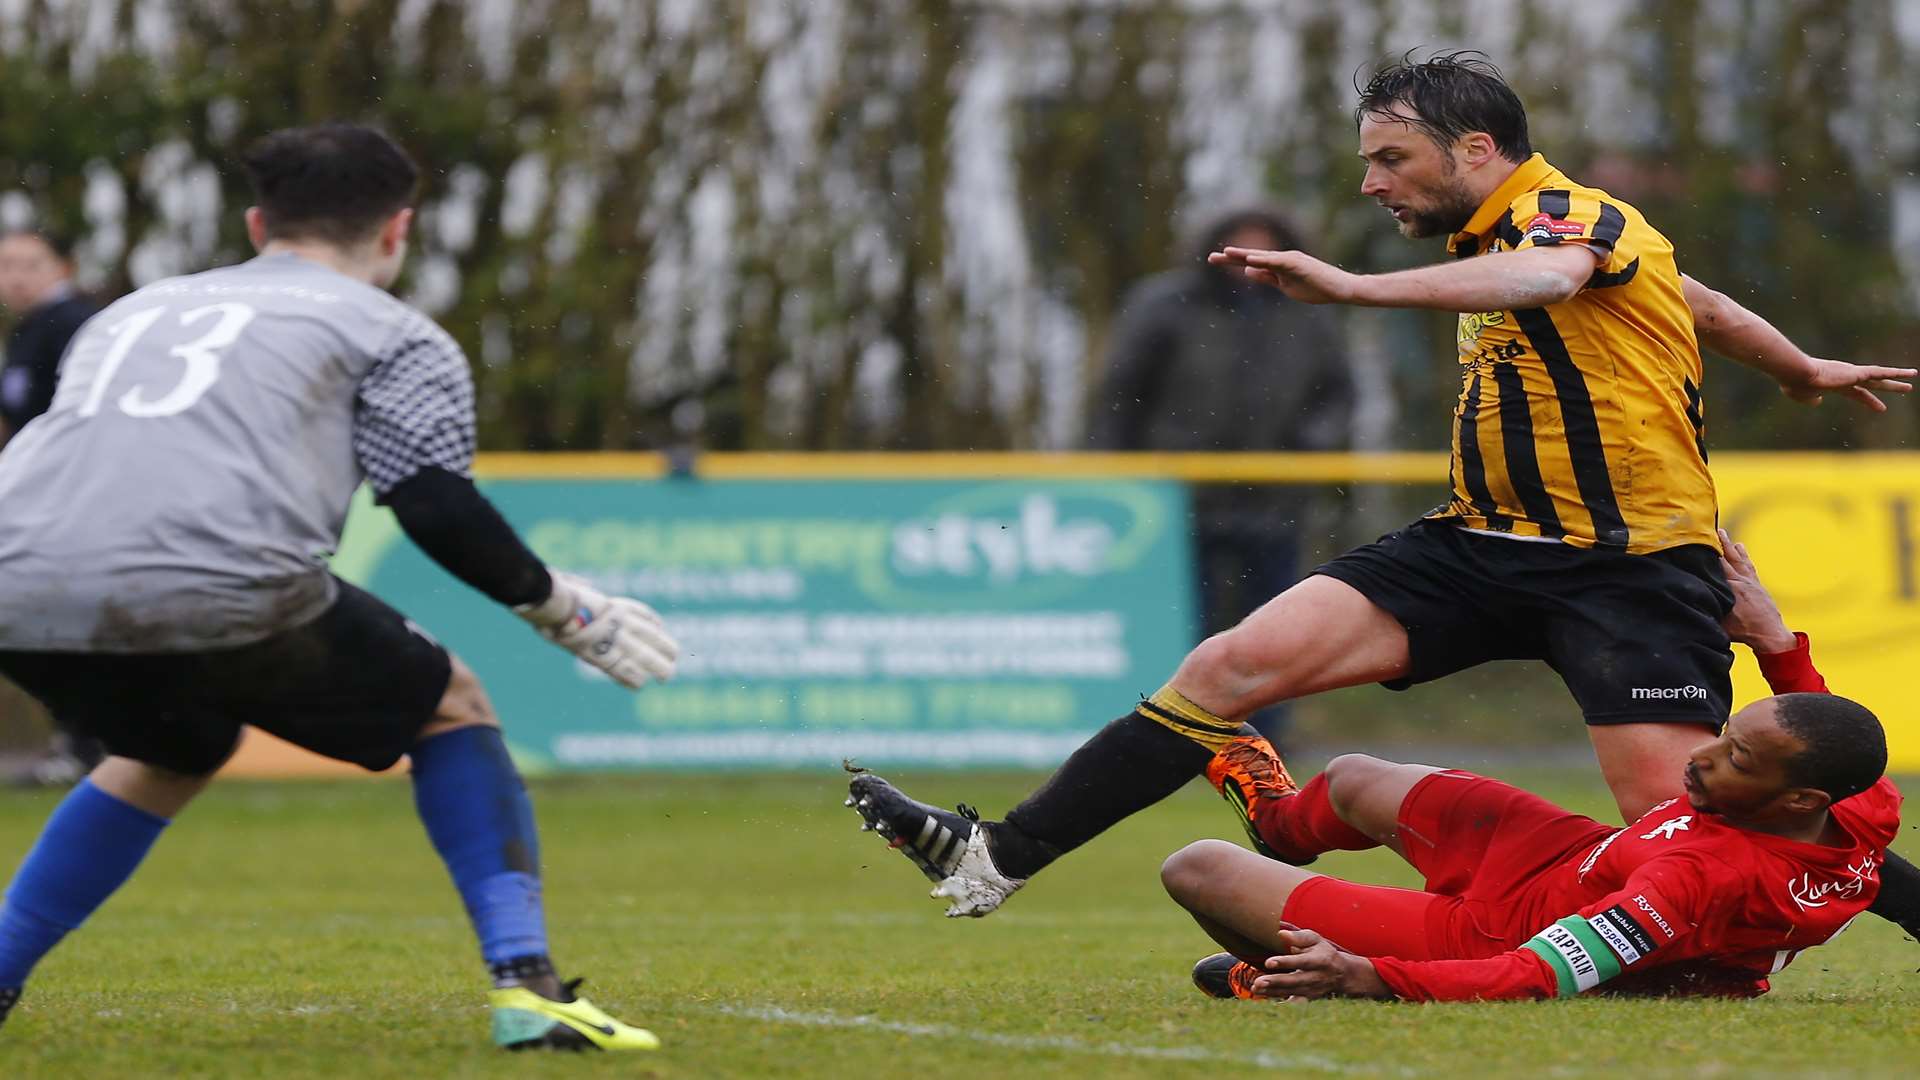 Micheal Everitt rides a tackle in the penalty area Picture: Matt Bristow